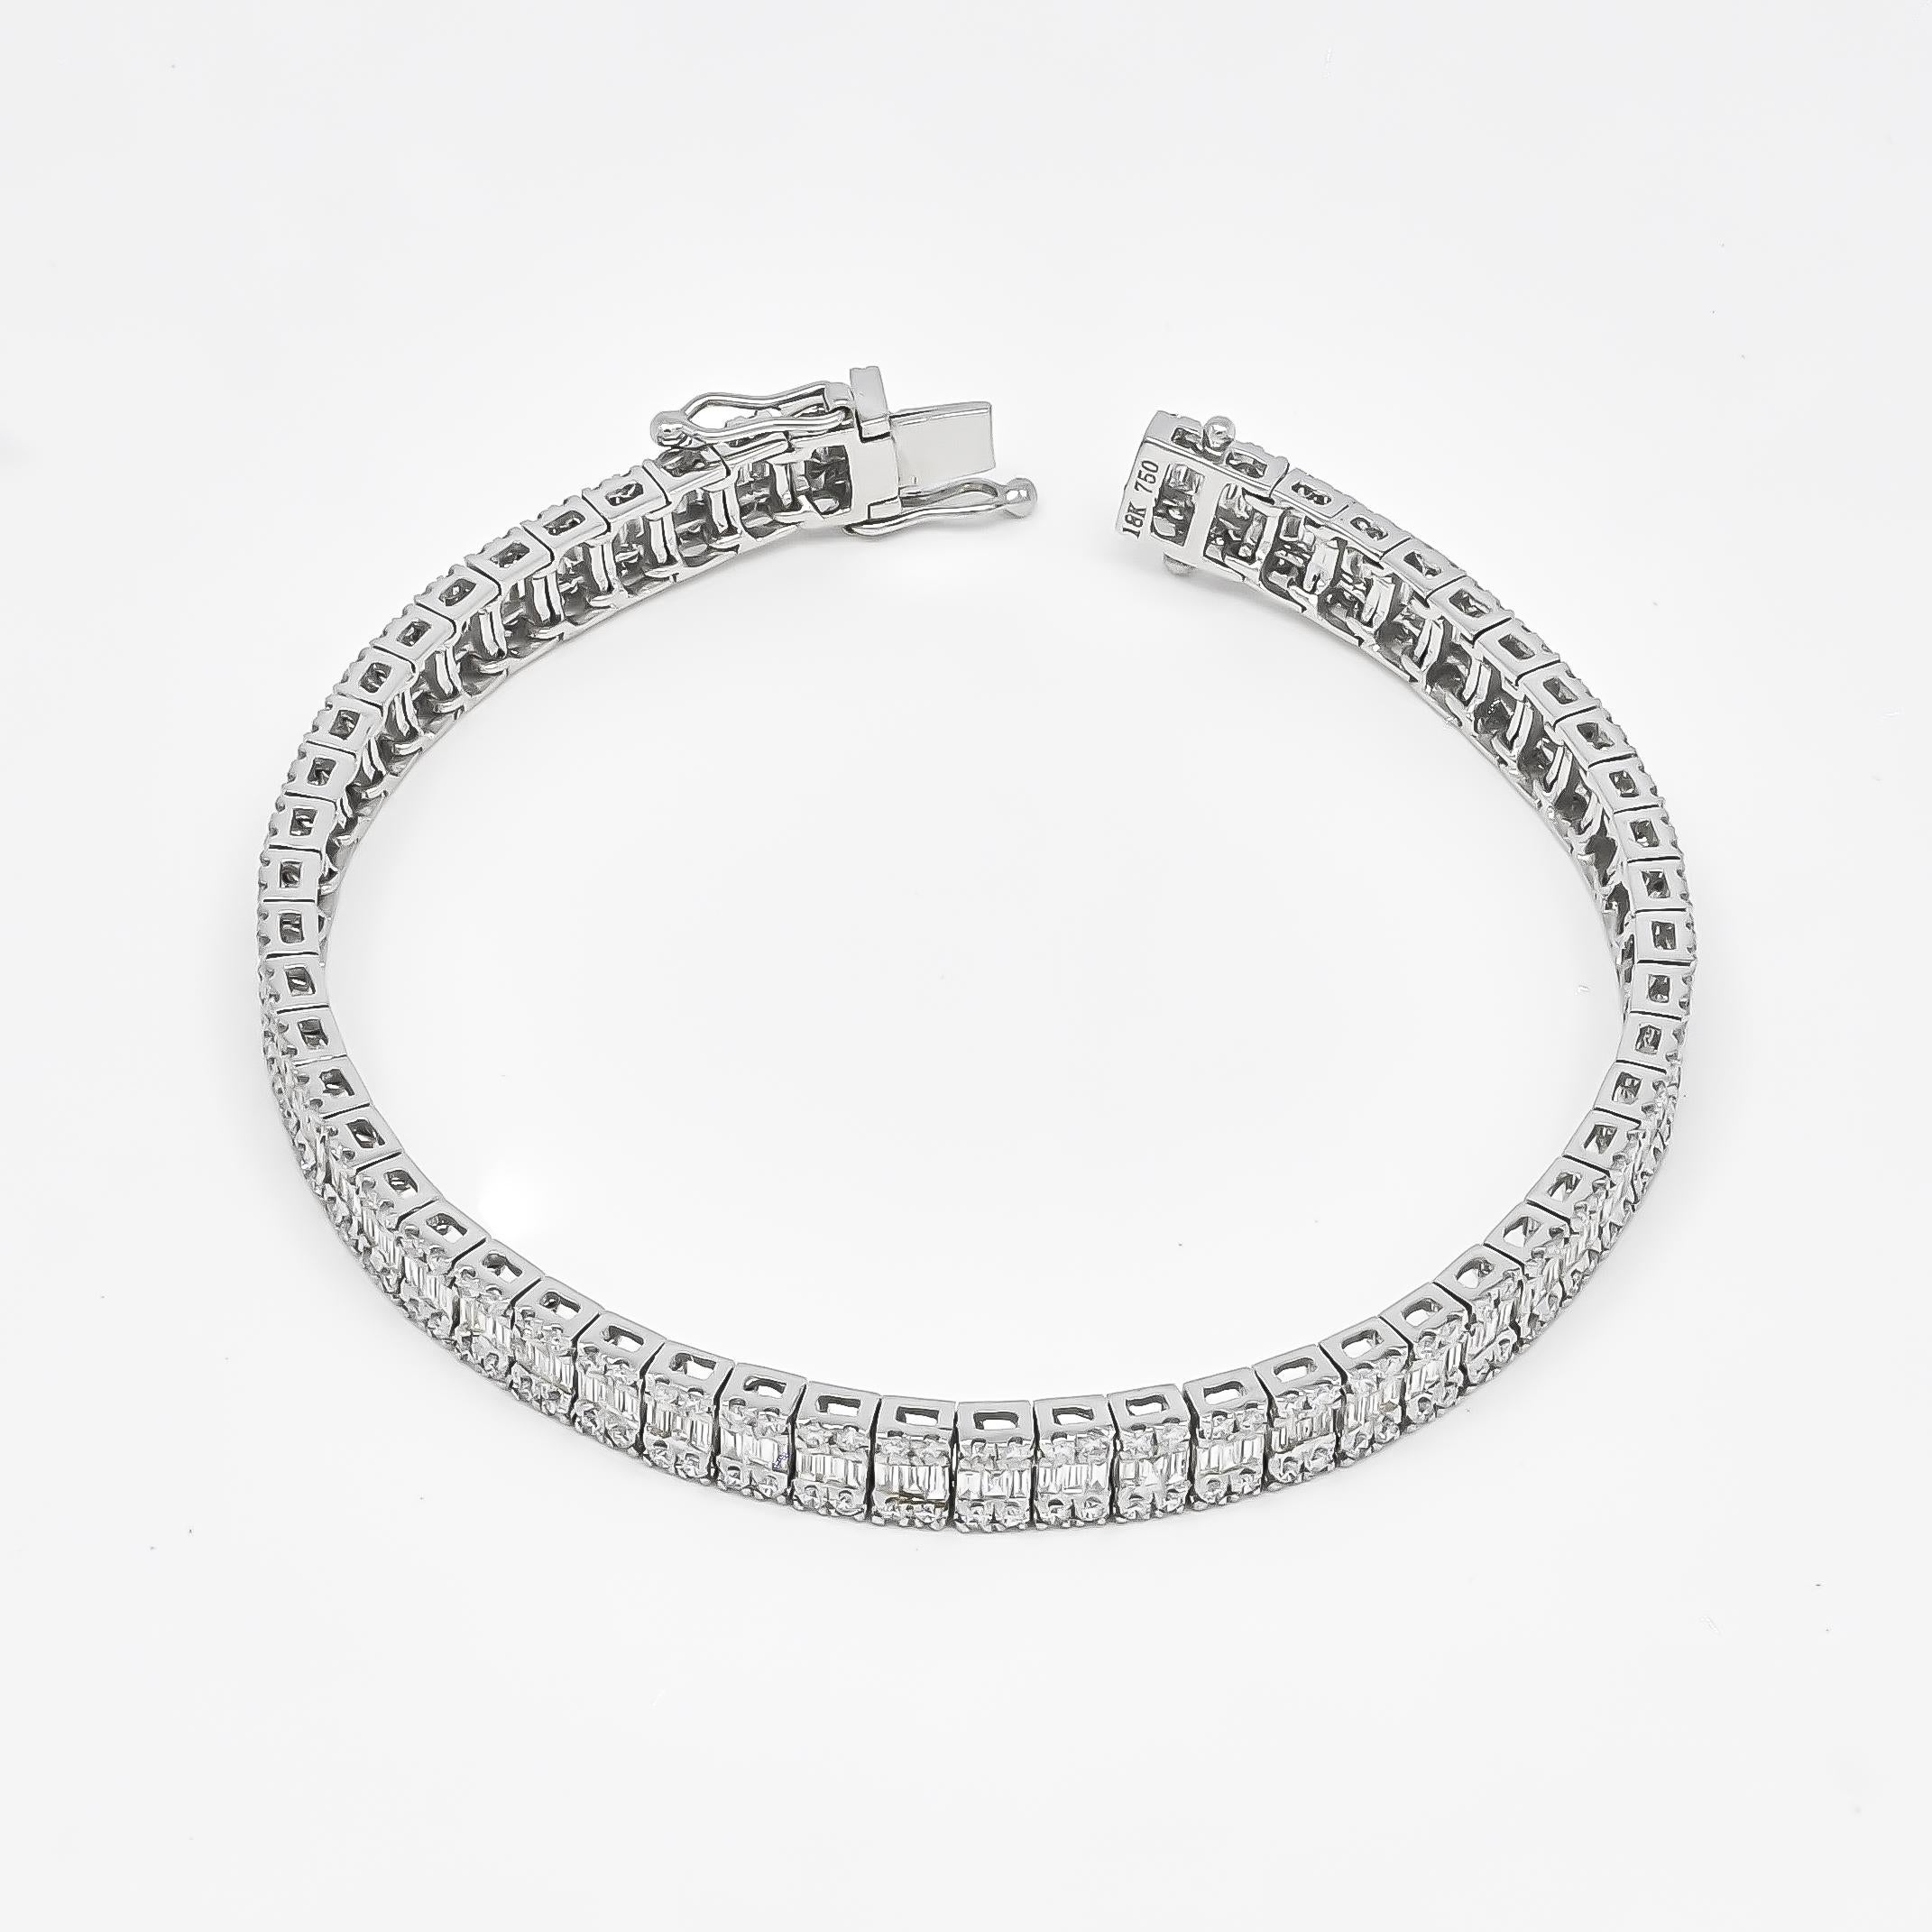 Artfully set in 18KT white gold, this exquisite bracelet features the soft shimmer of diamond baguette diamonds gorgeously enhanced by round-shape diamond borders.

The bracelet showcases a delicate dance of diamond baguettes, each one contributing